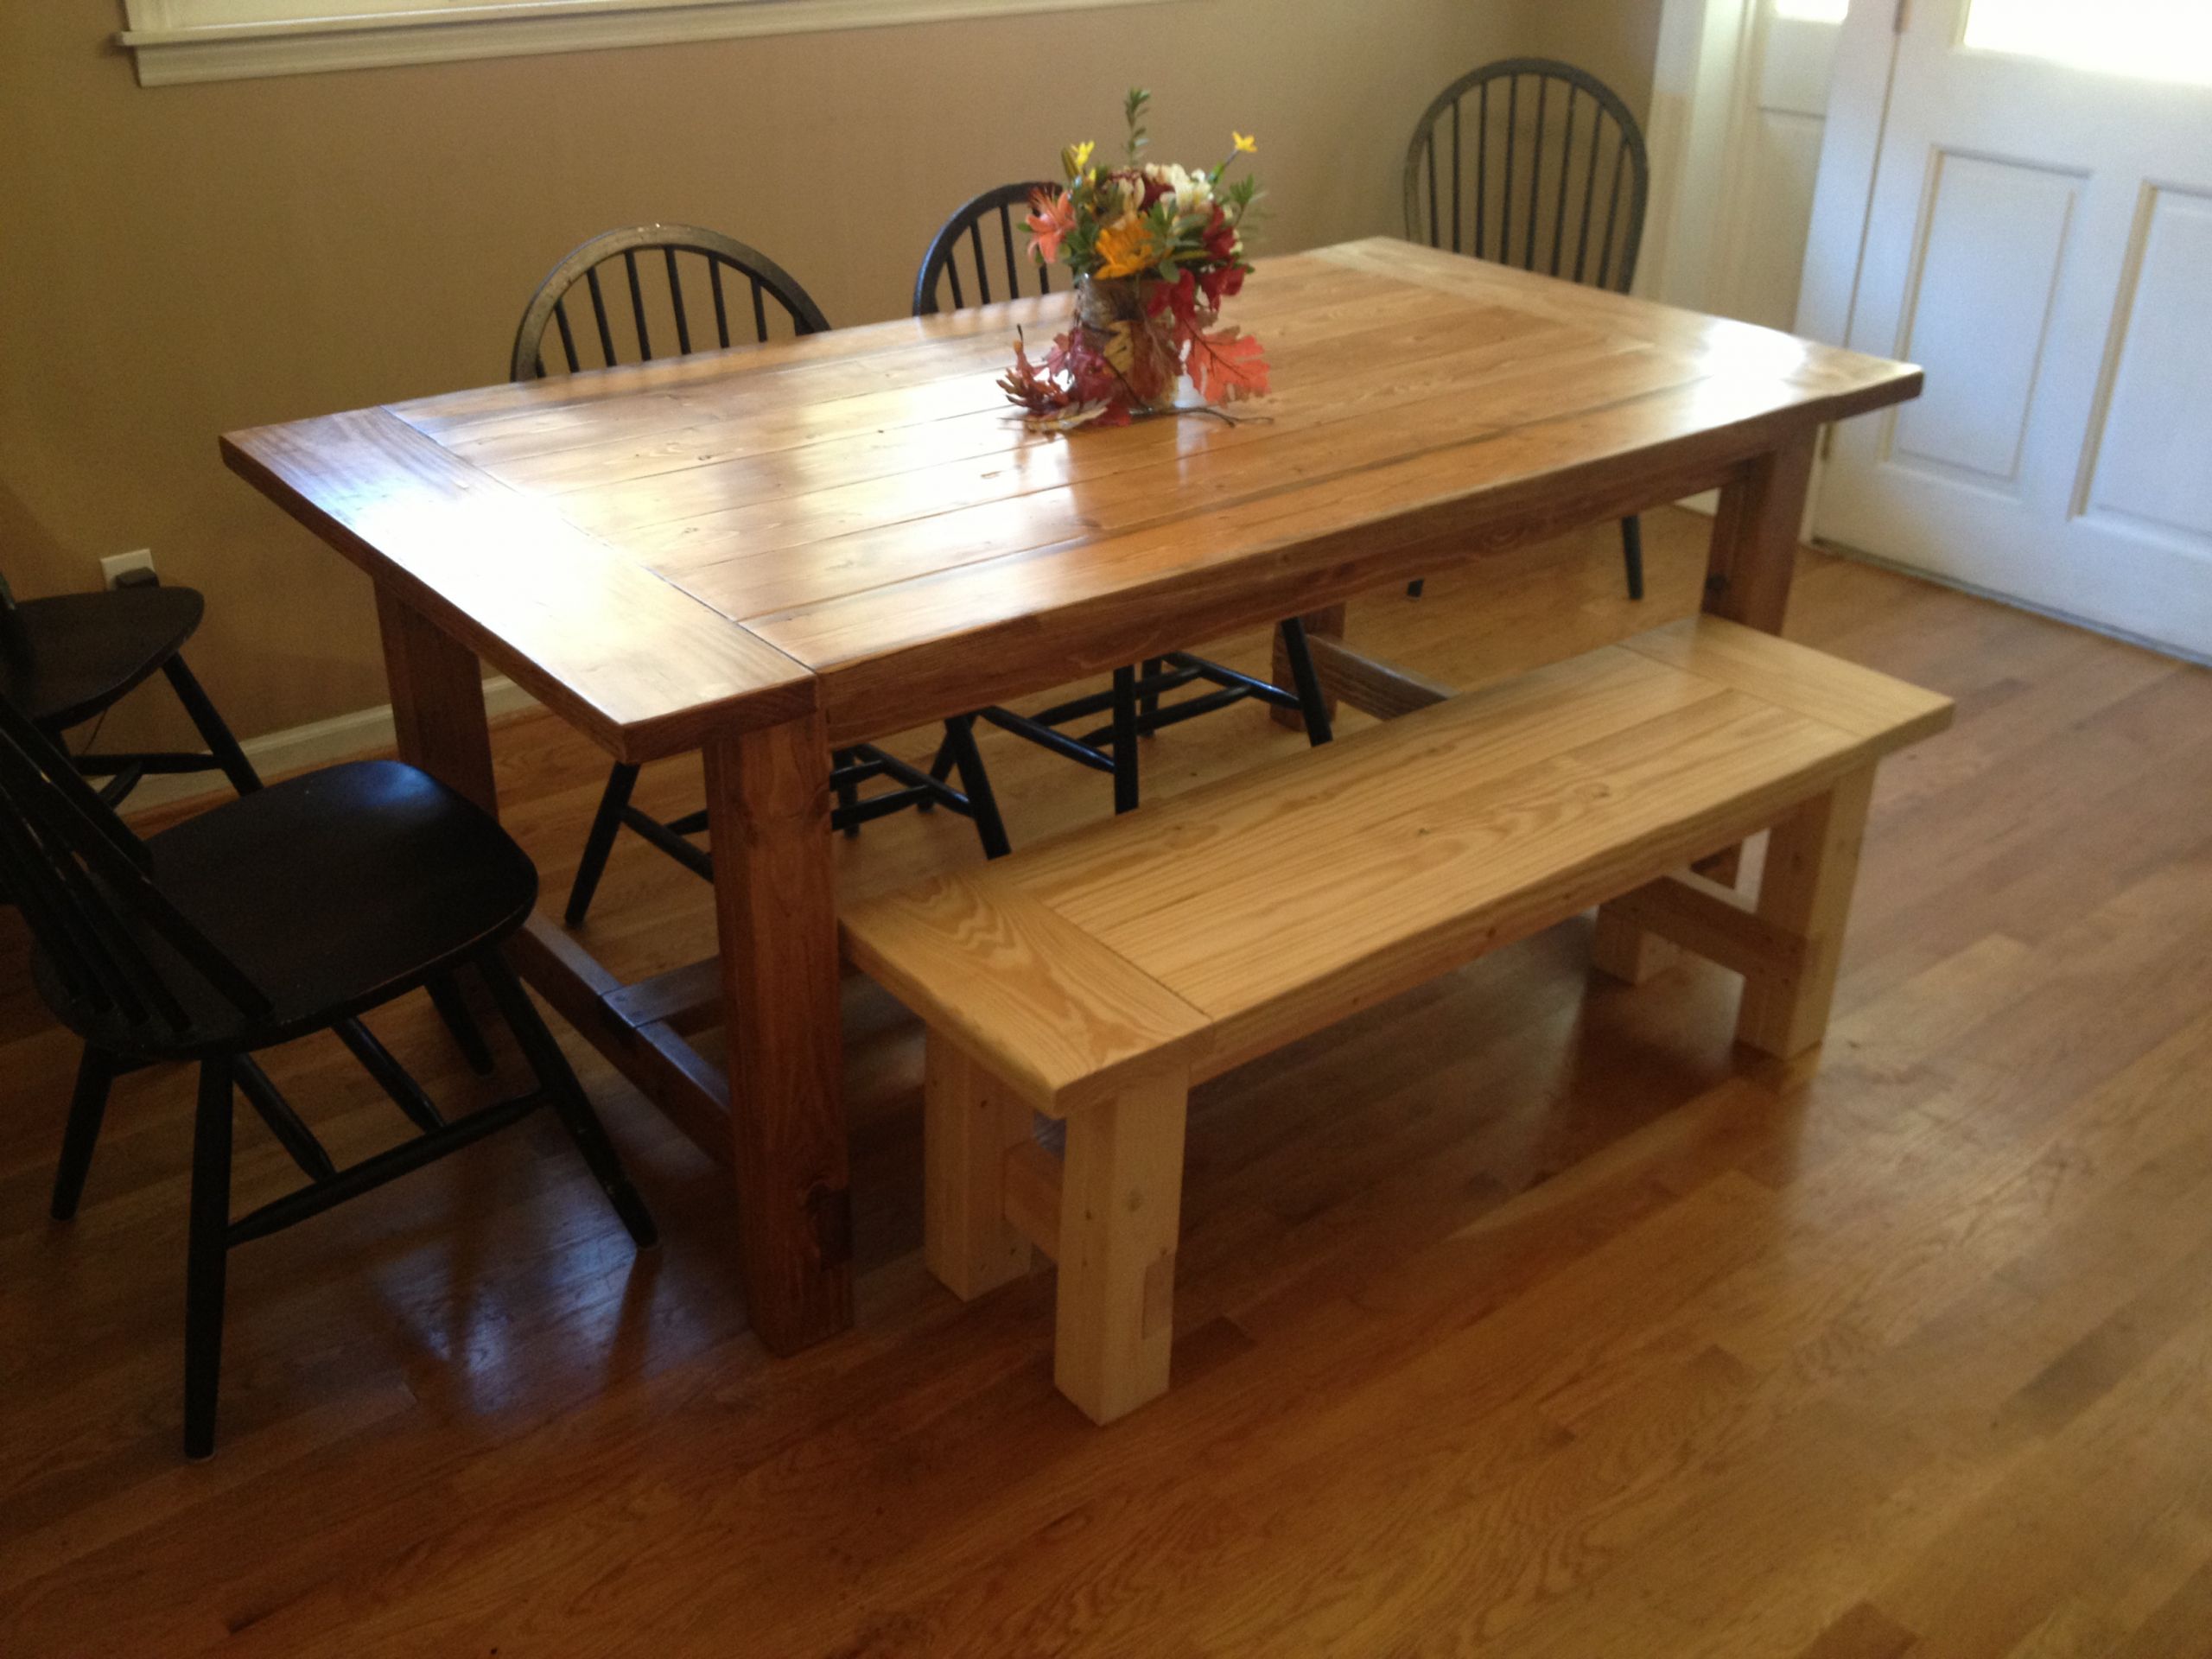 Rustic Kitchen Bench
 Free plans for making a rustic farmhouse table bench